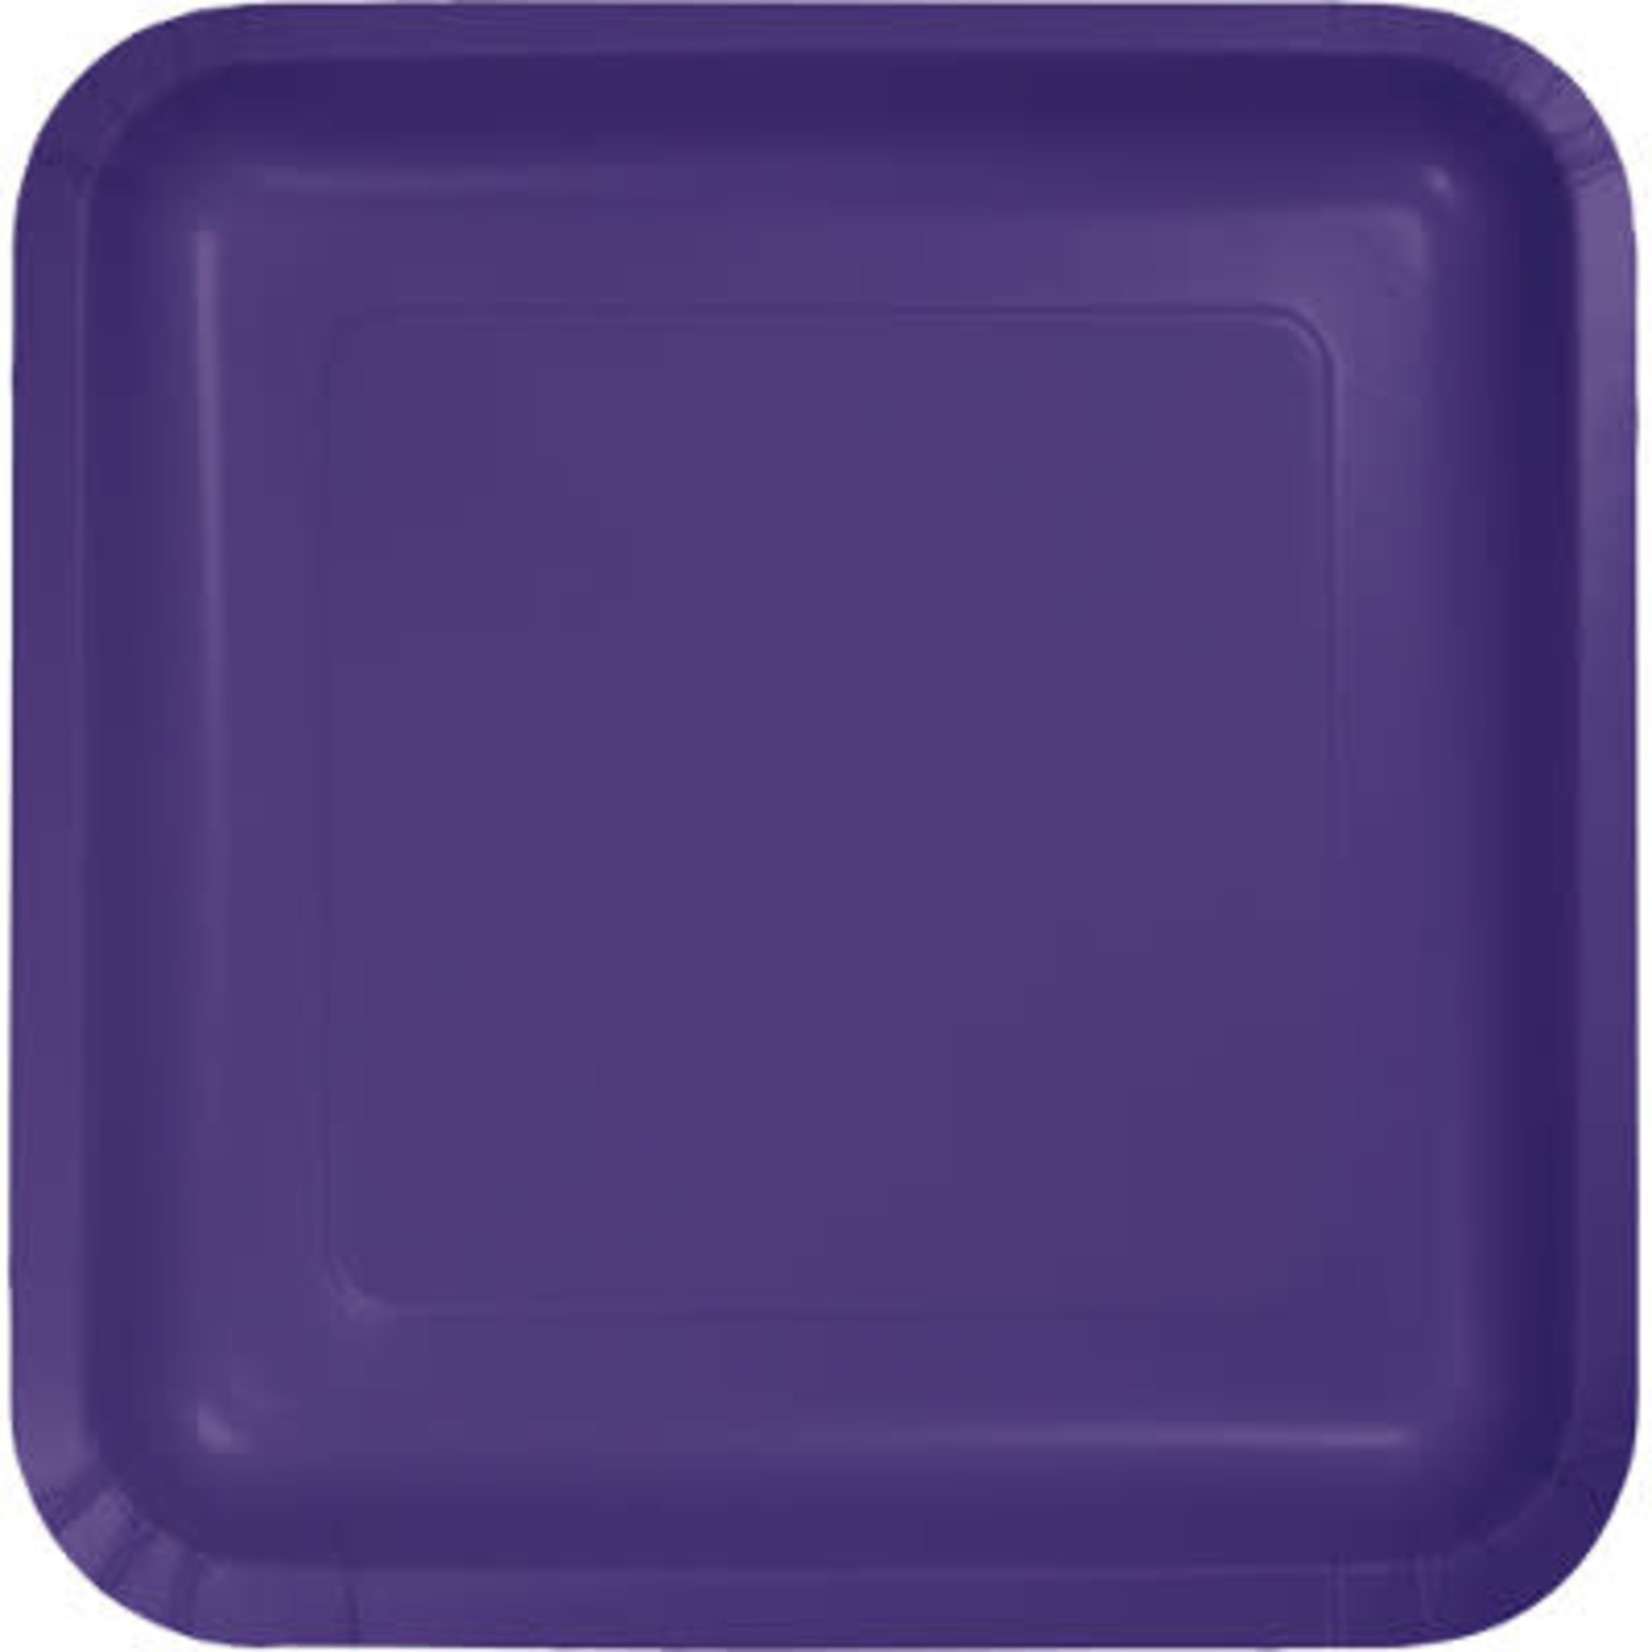 Touch of Color 7" Purple Square Plates - 18ct.